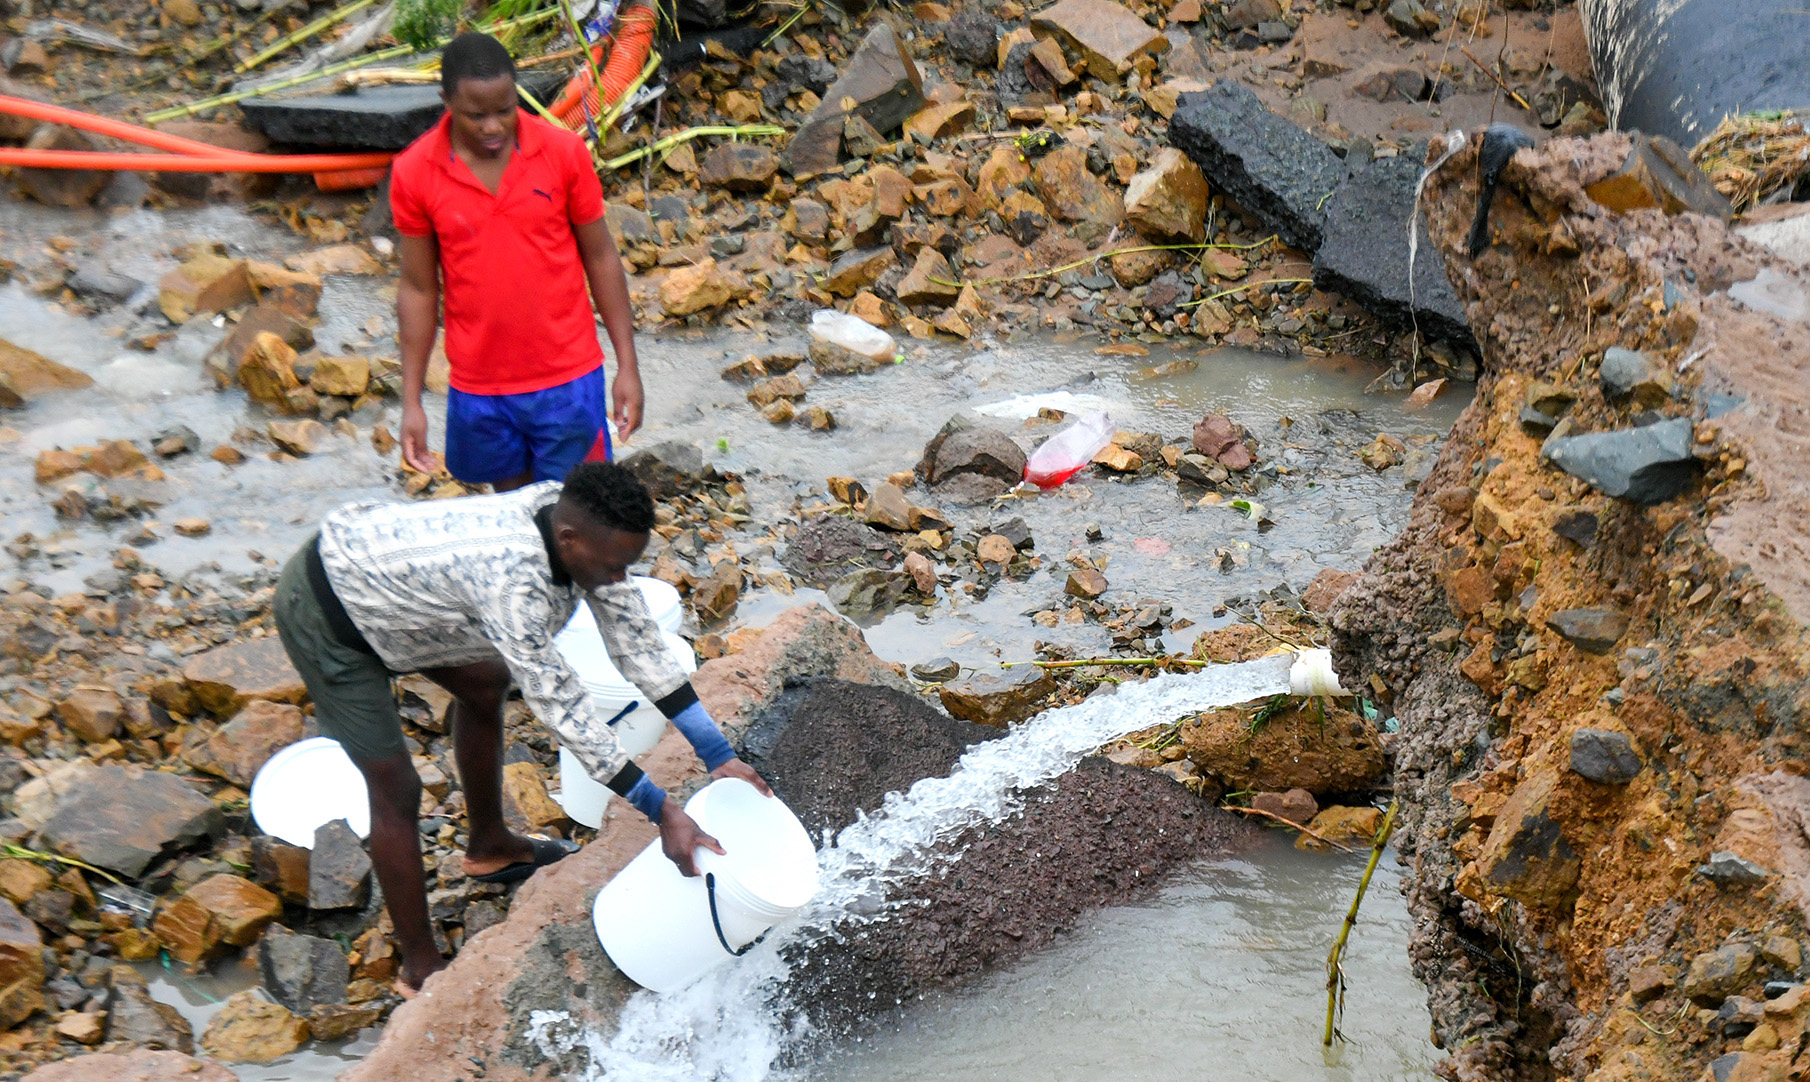 KZN floods - people collecting fresh water in Durban